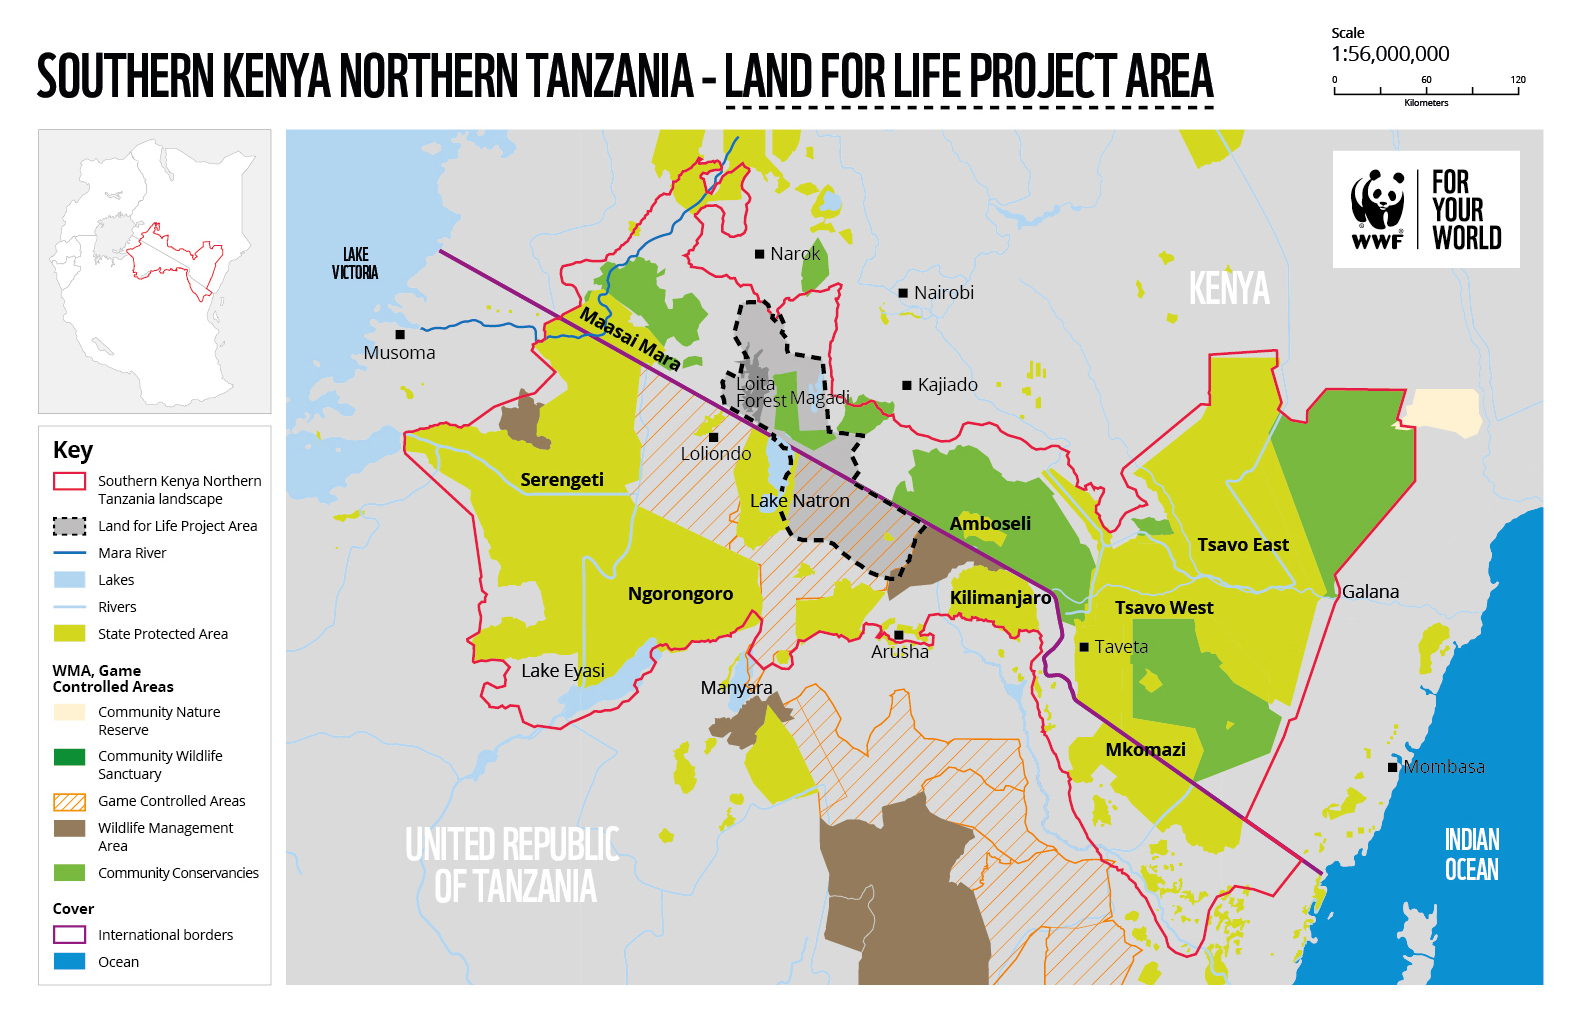 Map of Southern Kenya and Northern Tanzania that outlines the Land for Life project area